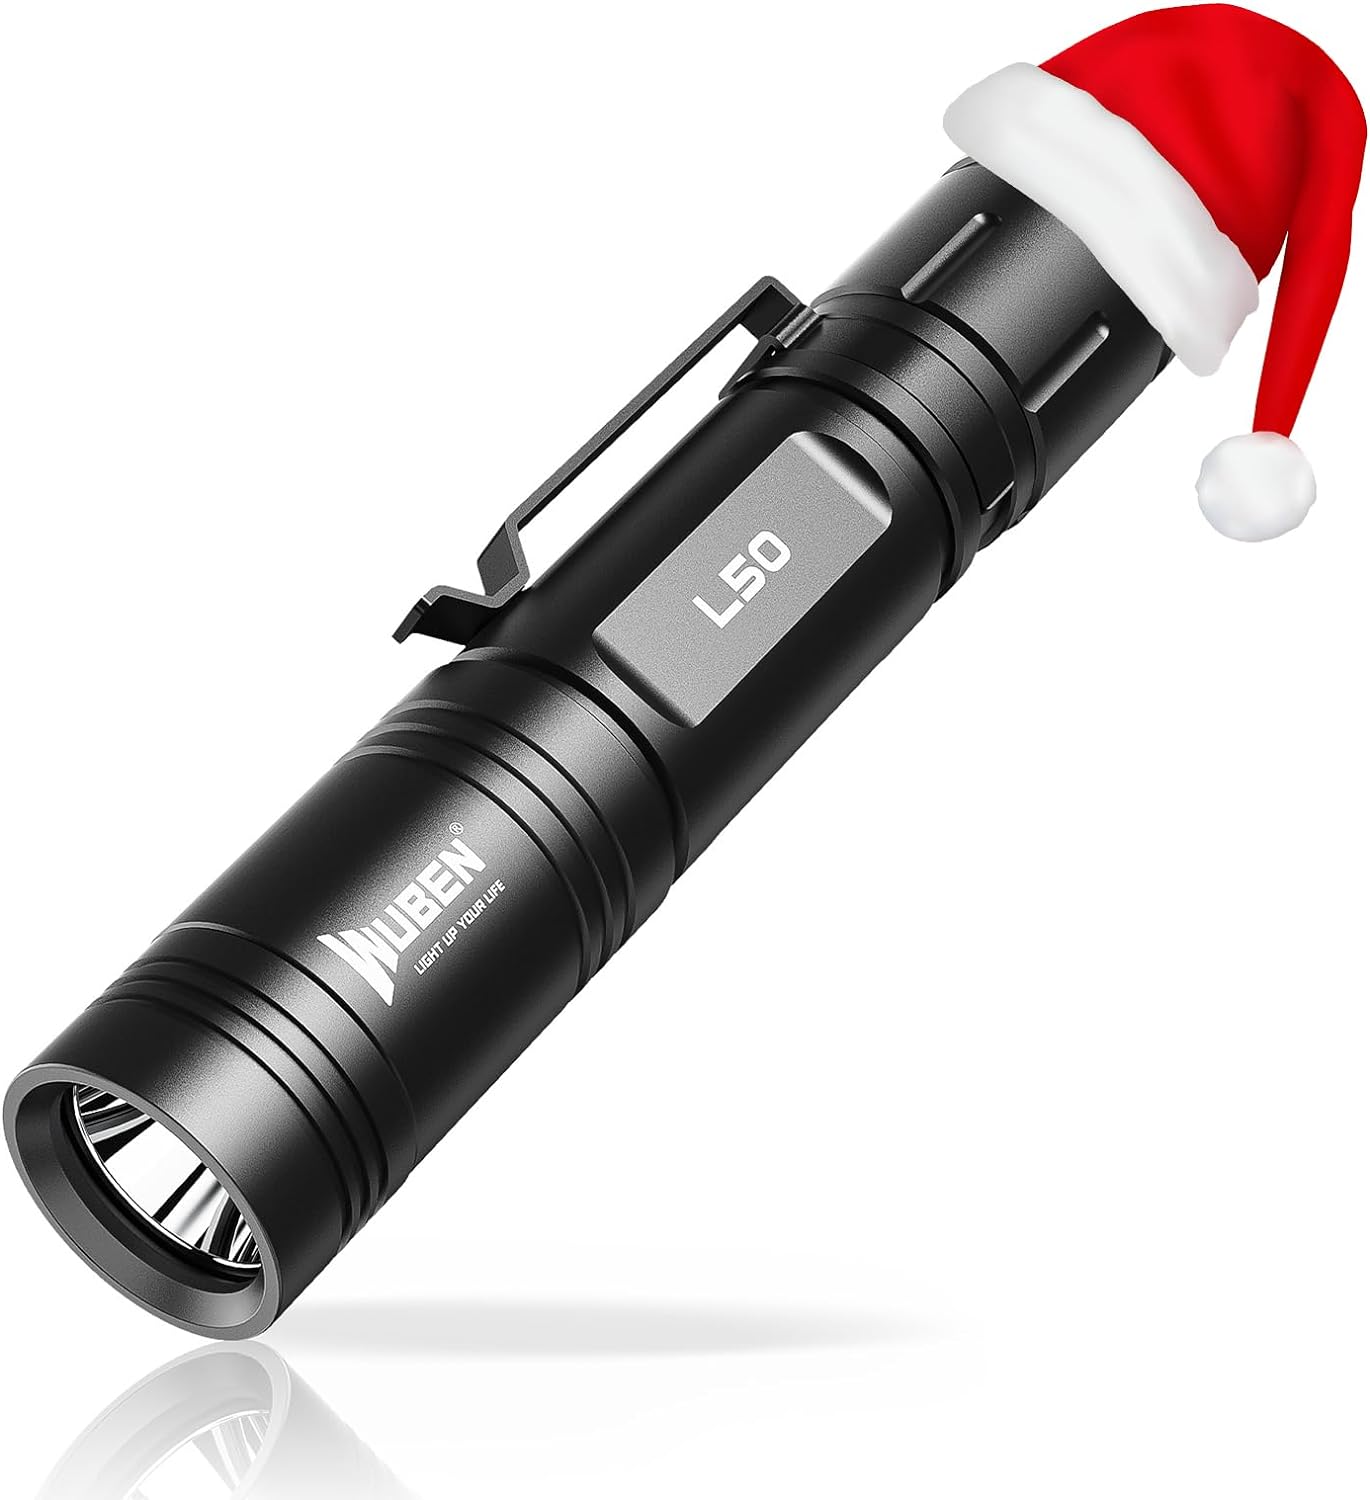 WUBEN L50 Rechargeable Flashlight, 1200 High Lumens Tactical Super Bright LED Flashlight, 5 Modes  IP68 Waterproof Pocket EDC Flash Light for Emergency, Rescue, Inspection, Repair